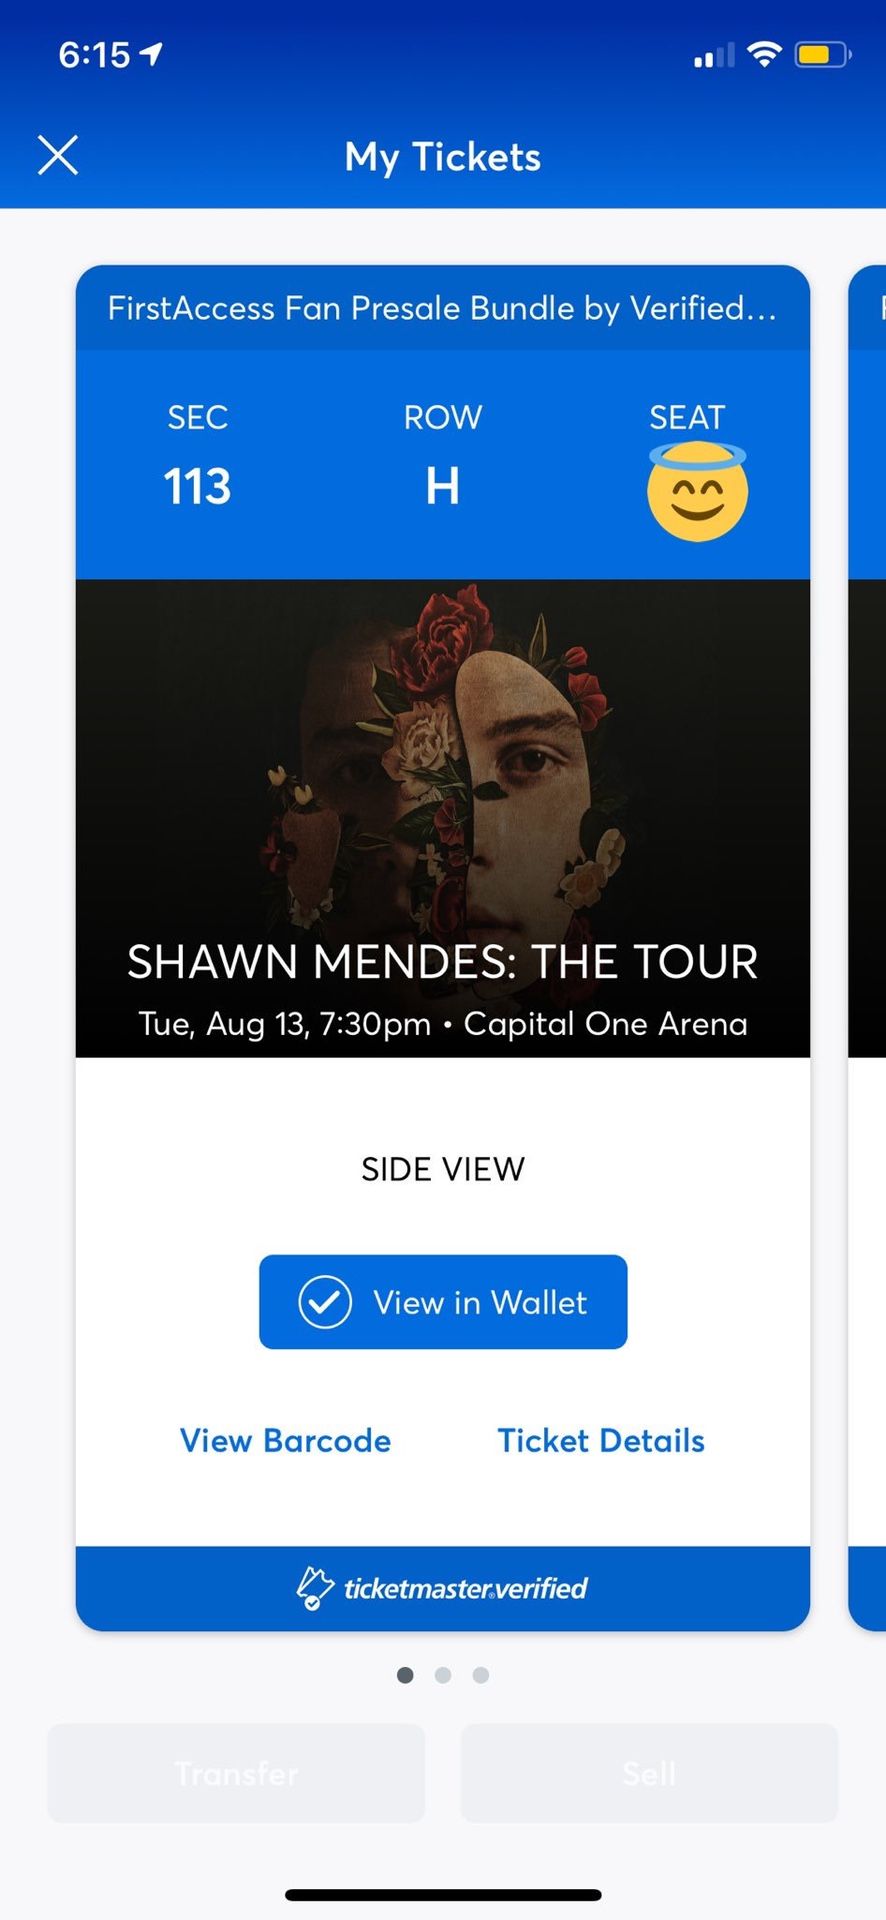 SHAWN MENDES TICKETS